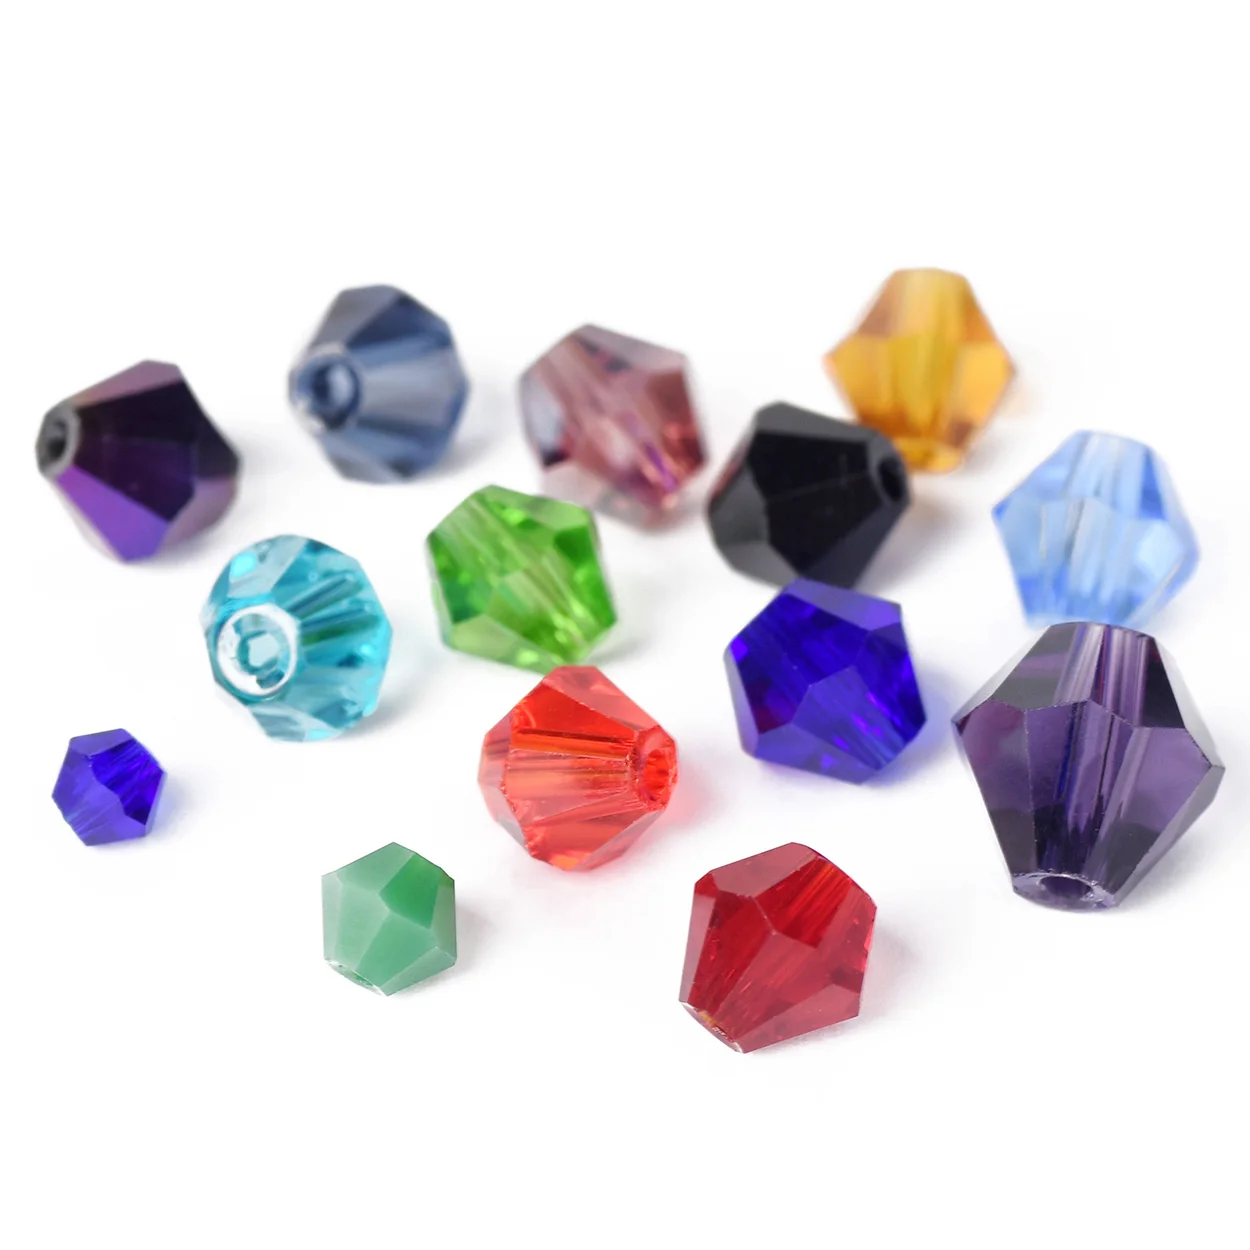 Bicone Faceted Crystal Glass Loose Spacer Beads lot Colors 3mm 4mm 6mm 8mm for Jewelry Making DIY